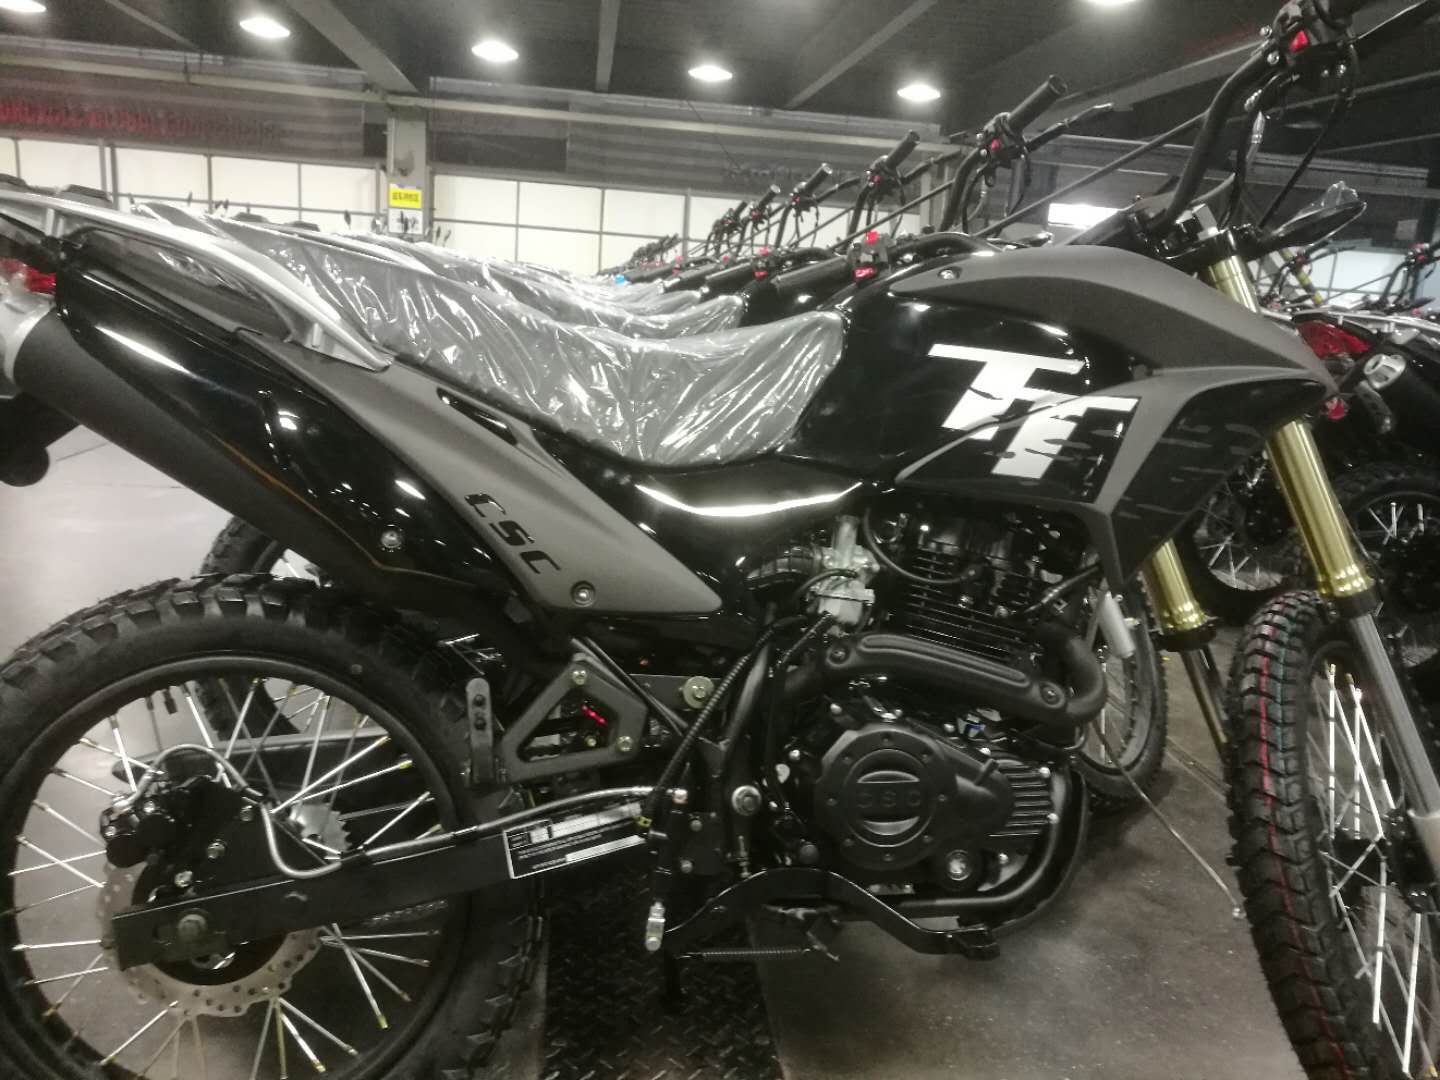 The 2019 TT250 in Blue with Black graphics.